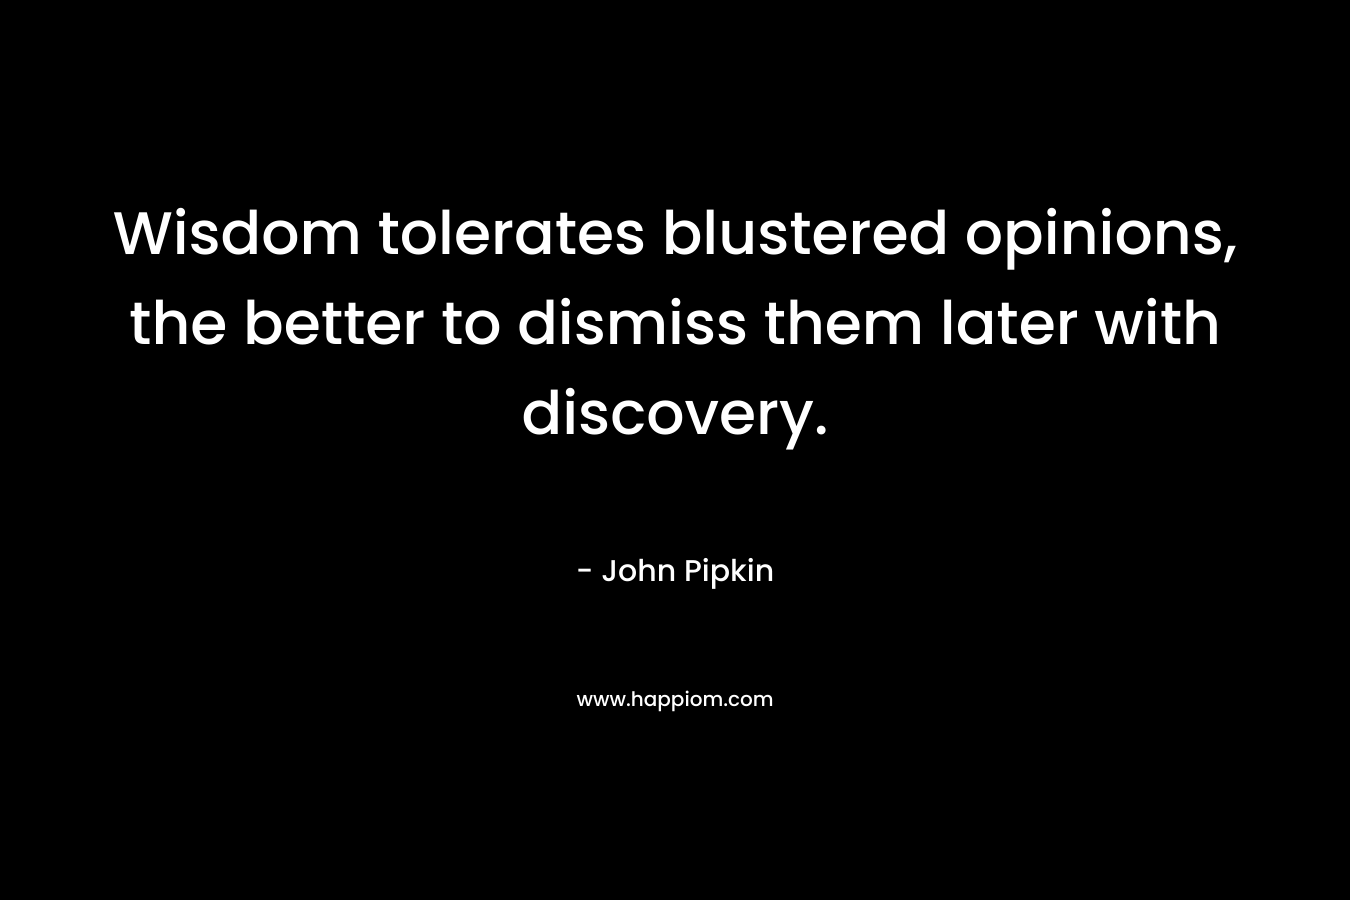 Wisdom tolerates blustered opinions, the better to dismiss them later with discovery.